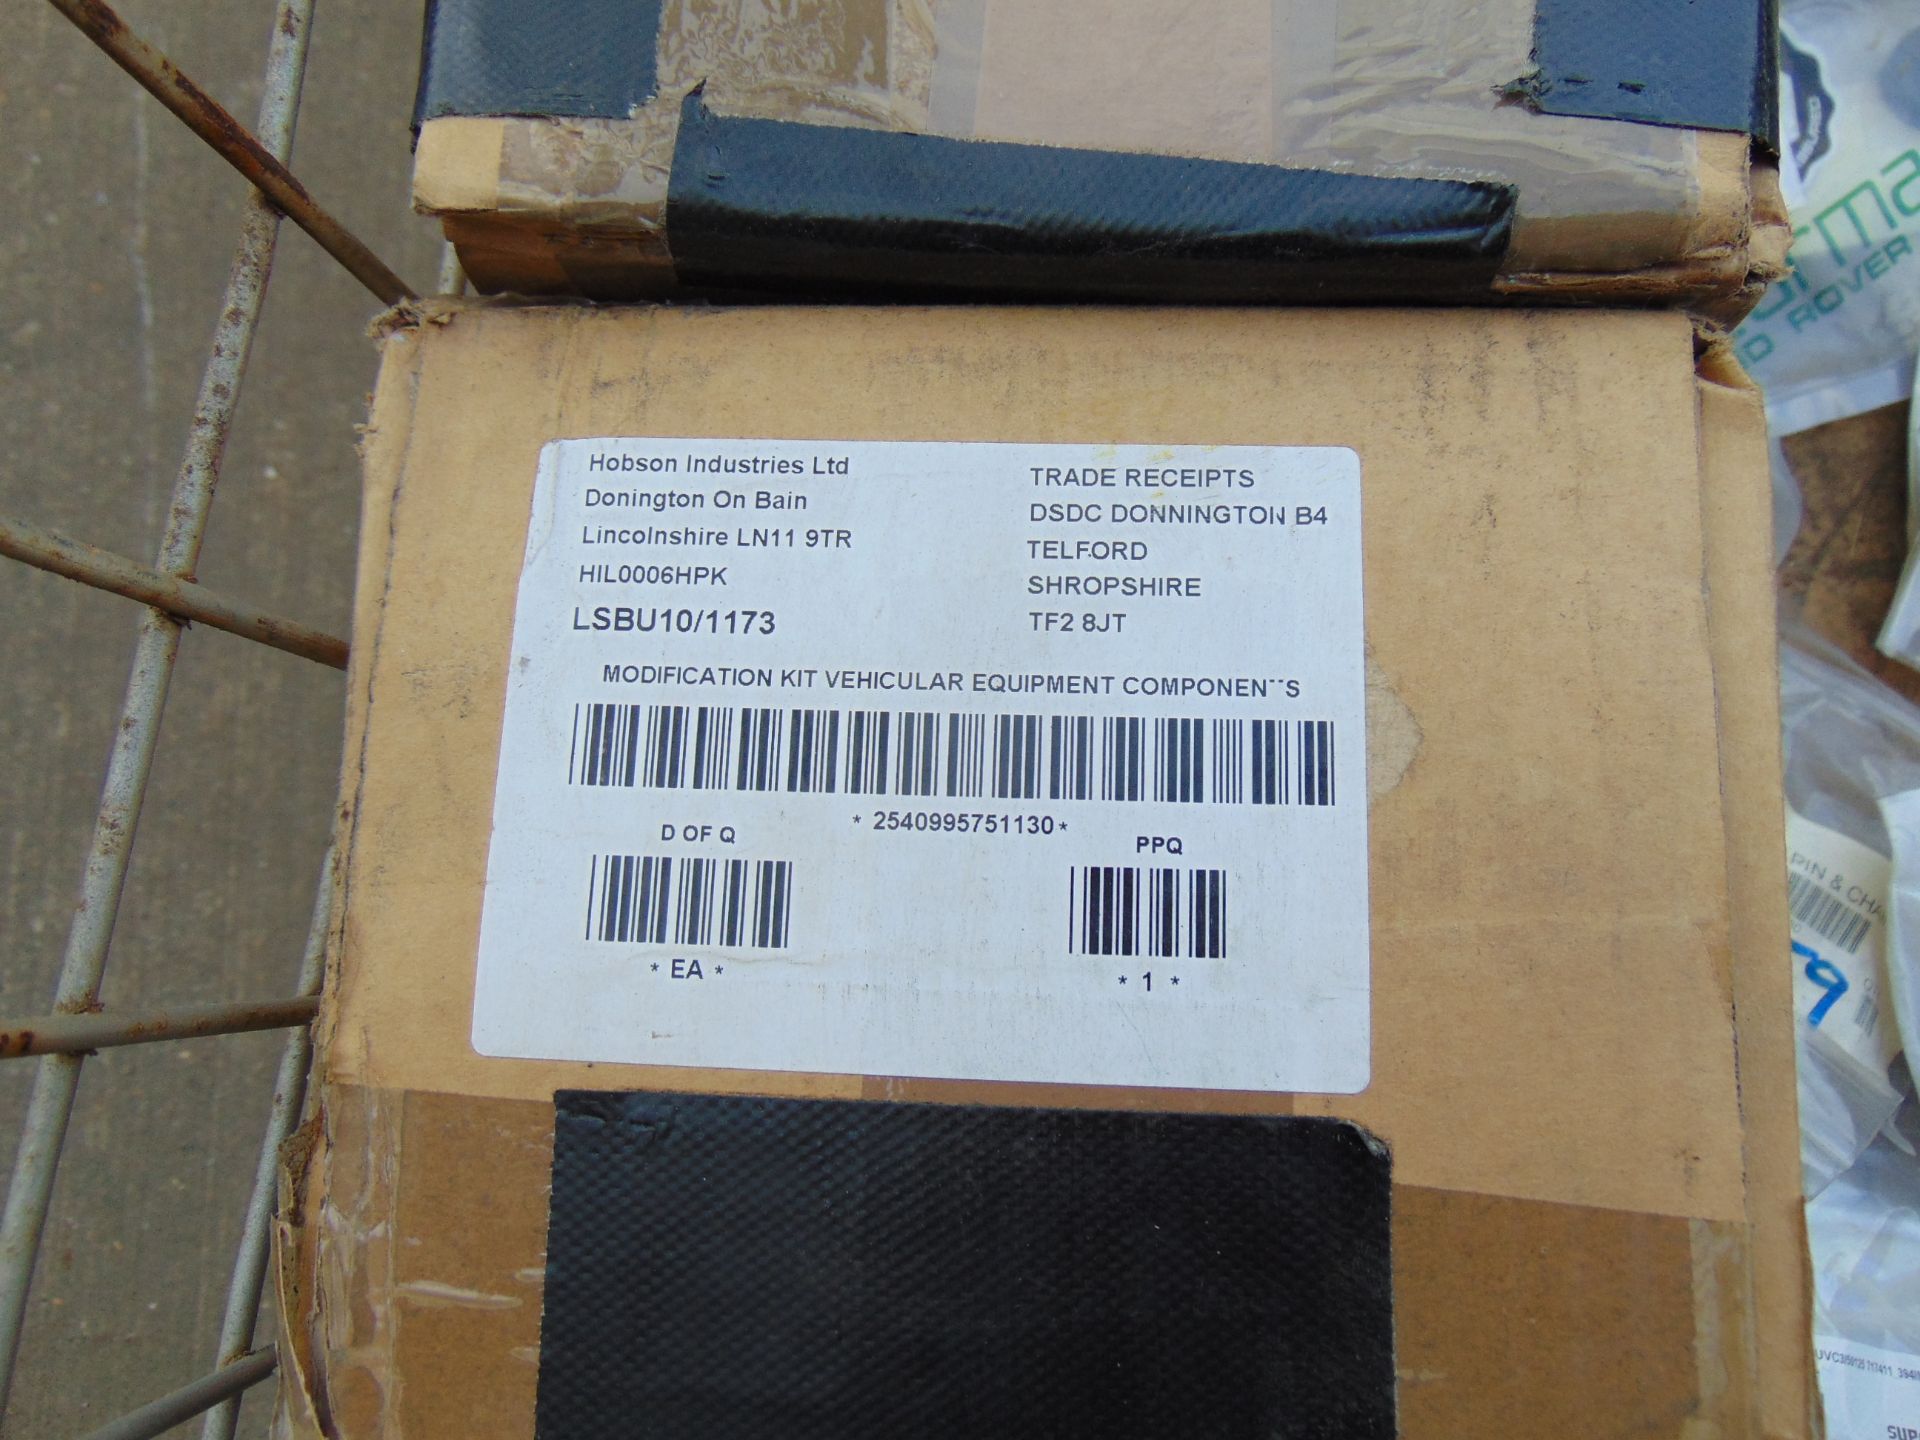 1 x Stillage of New Unissued Land Rover Spares as Shown - Image 6 of 10